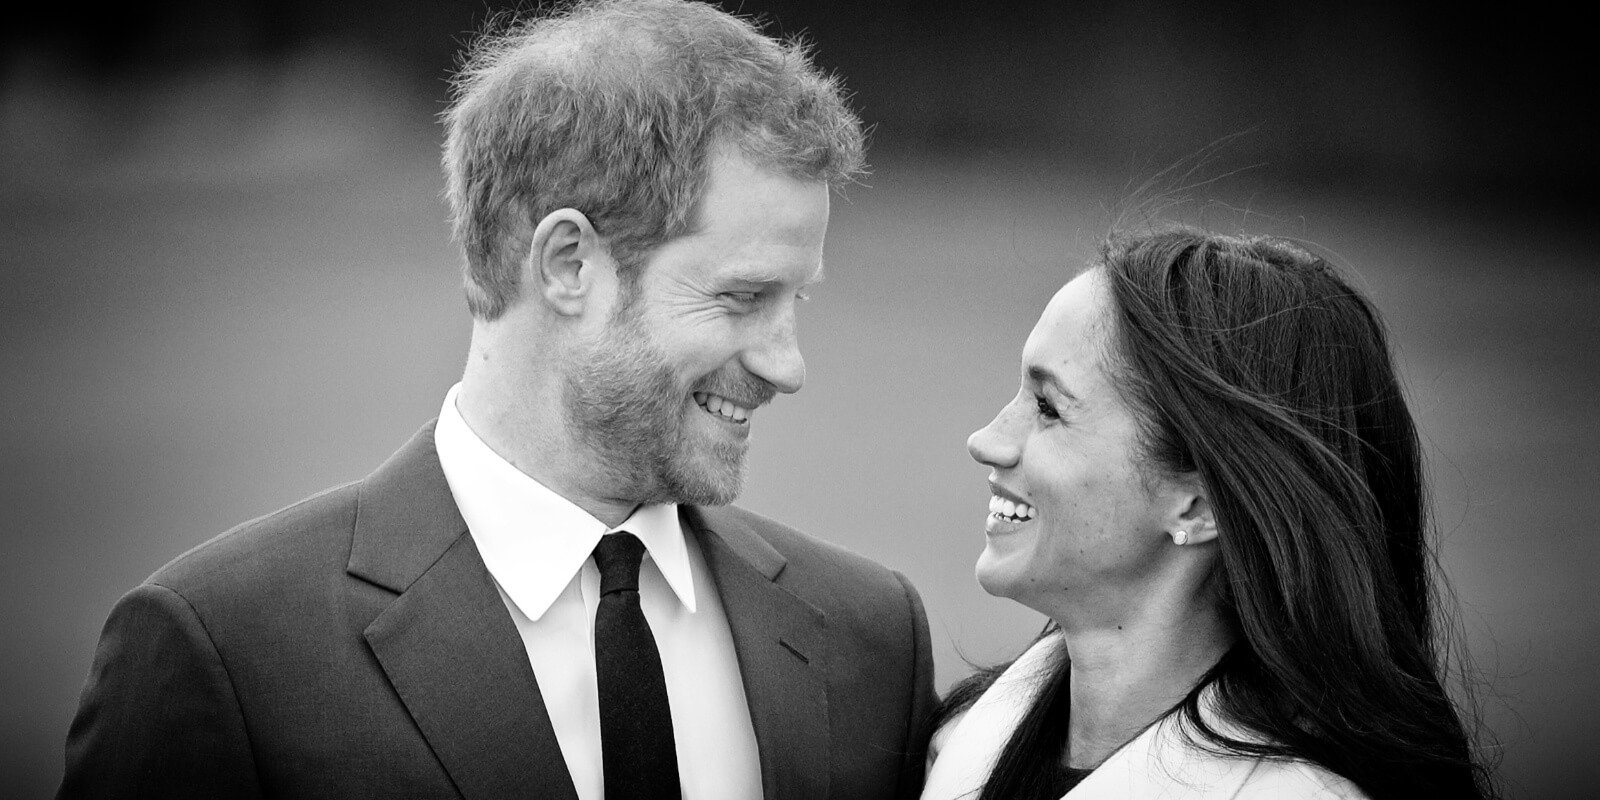 Prince Harry and Meghan Markle photographed during their engagement announcement in 2017.